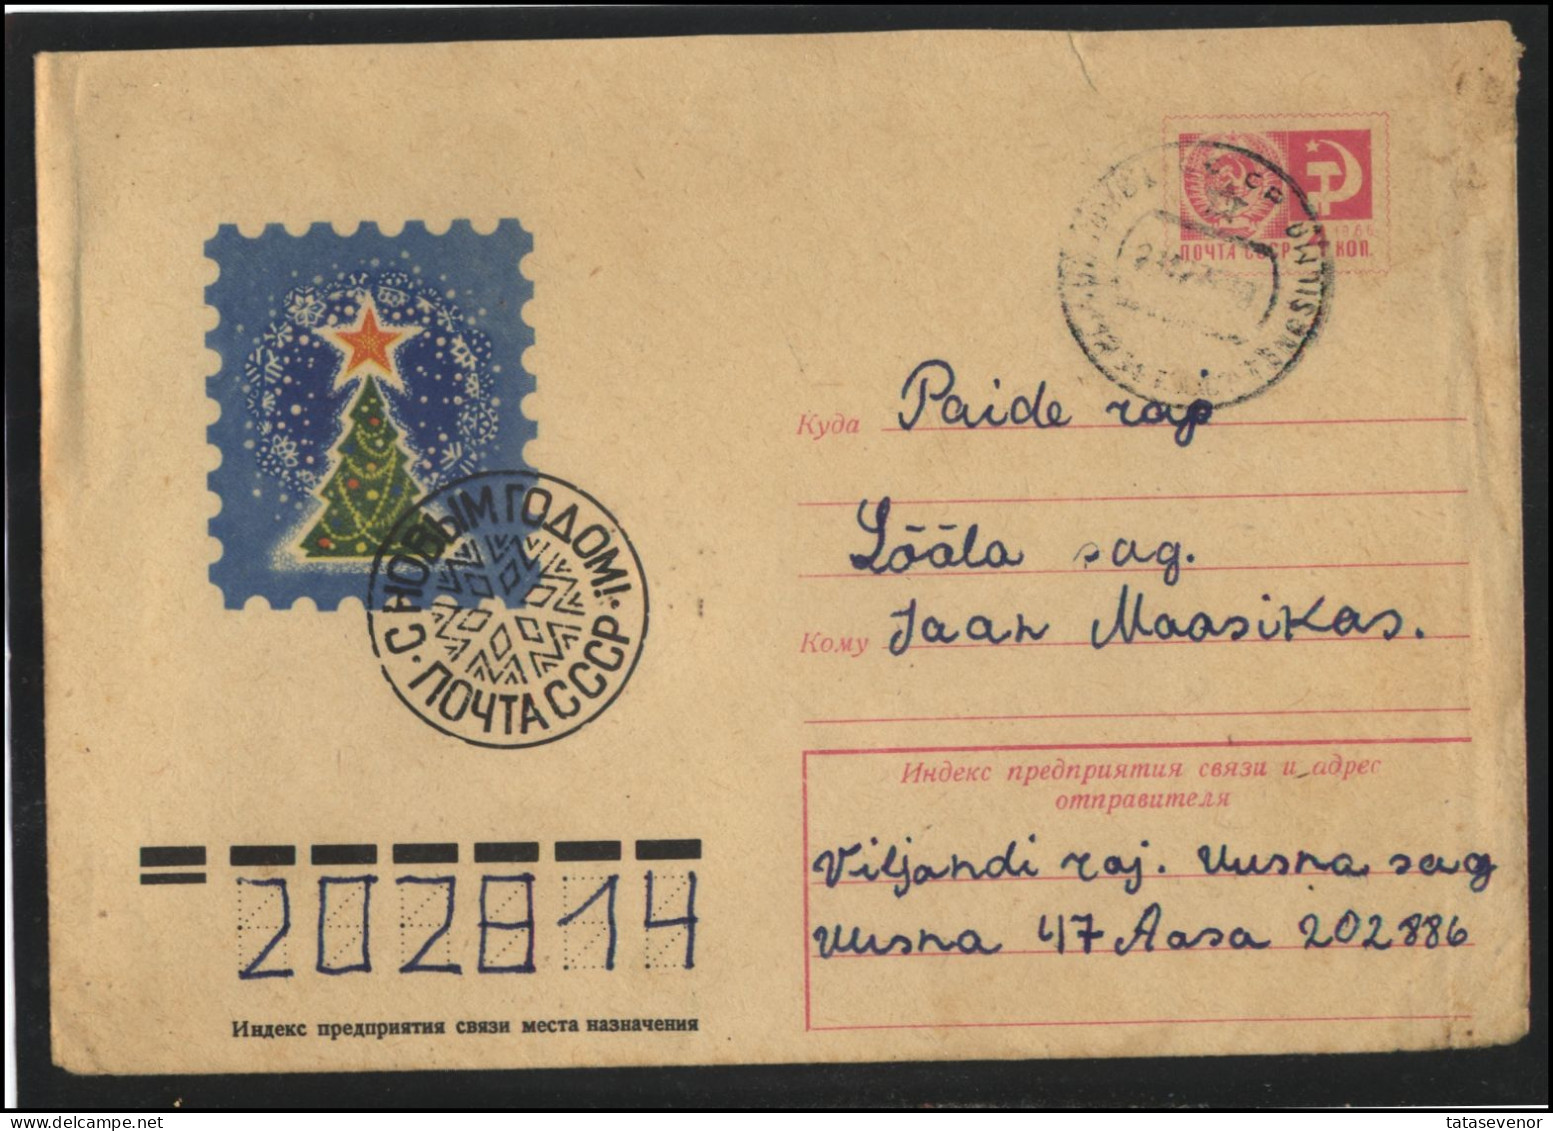 RUSSIA USSR Stationery USED ESTONIA AMBL 1368  TANASSILMA Happy New Year Chtistmas Star - Unclassified